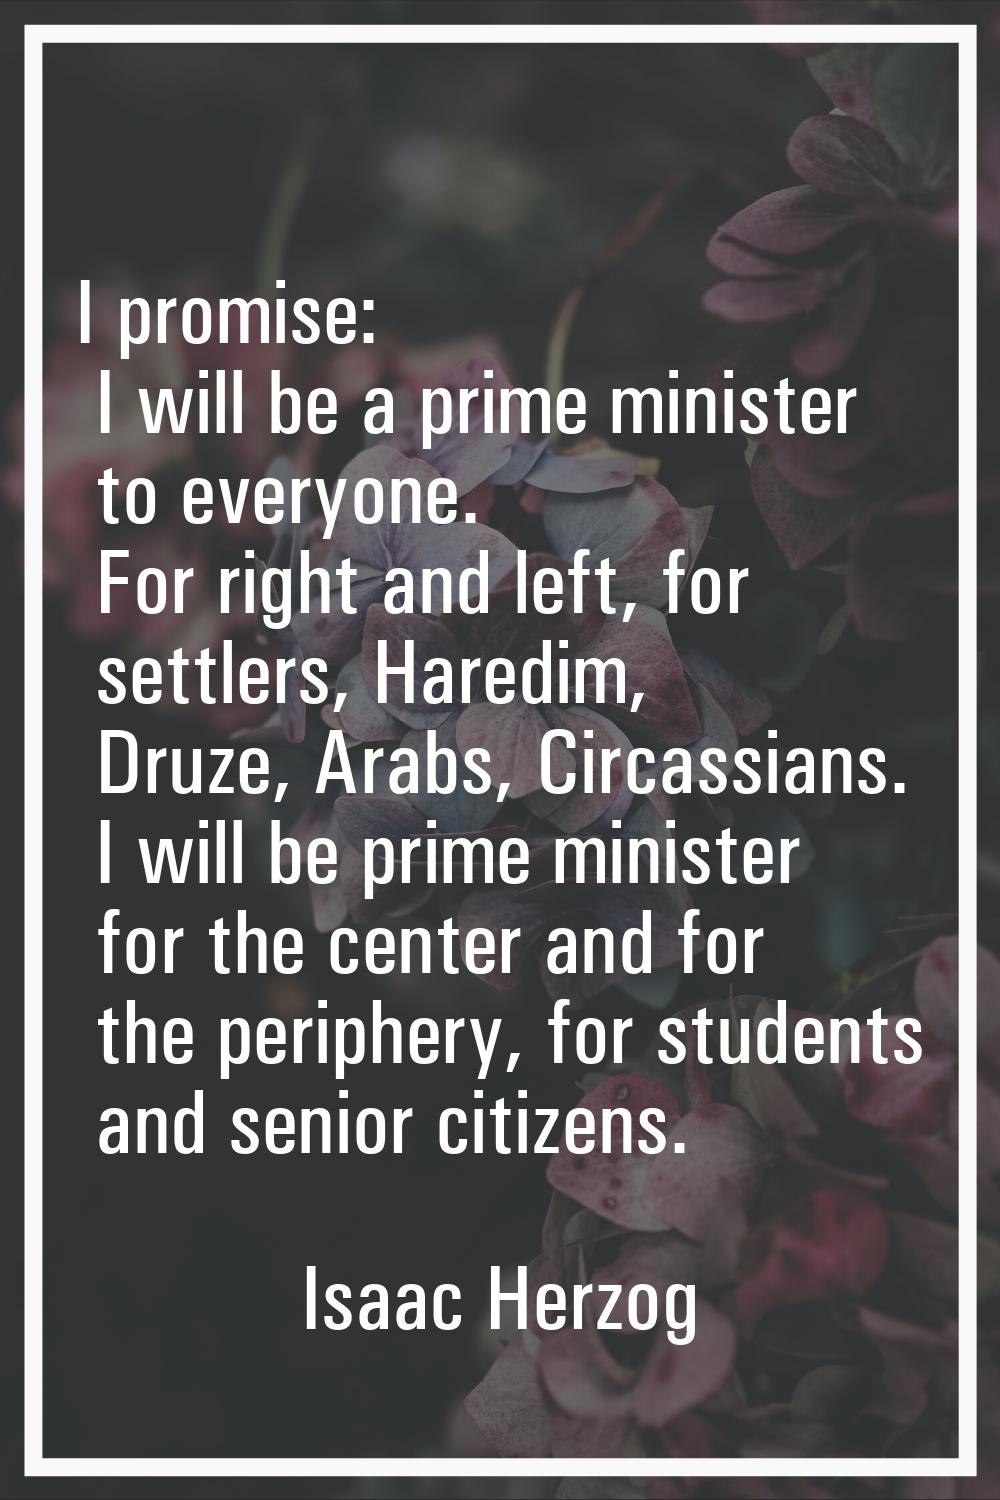 I promise: I will be a prime minister to everyone. For right and left, for settlers, Haredim, Druze